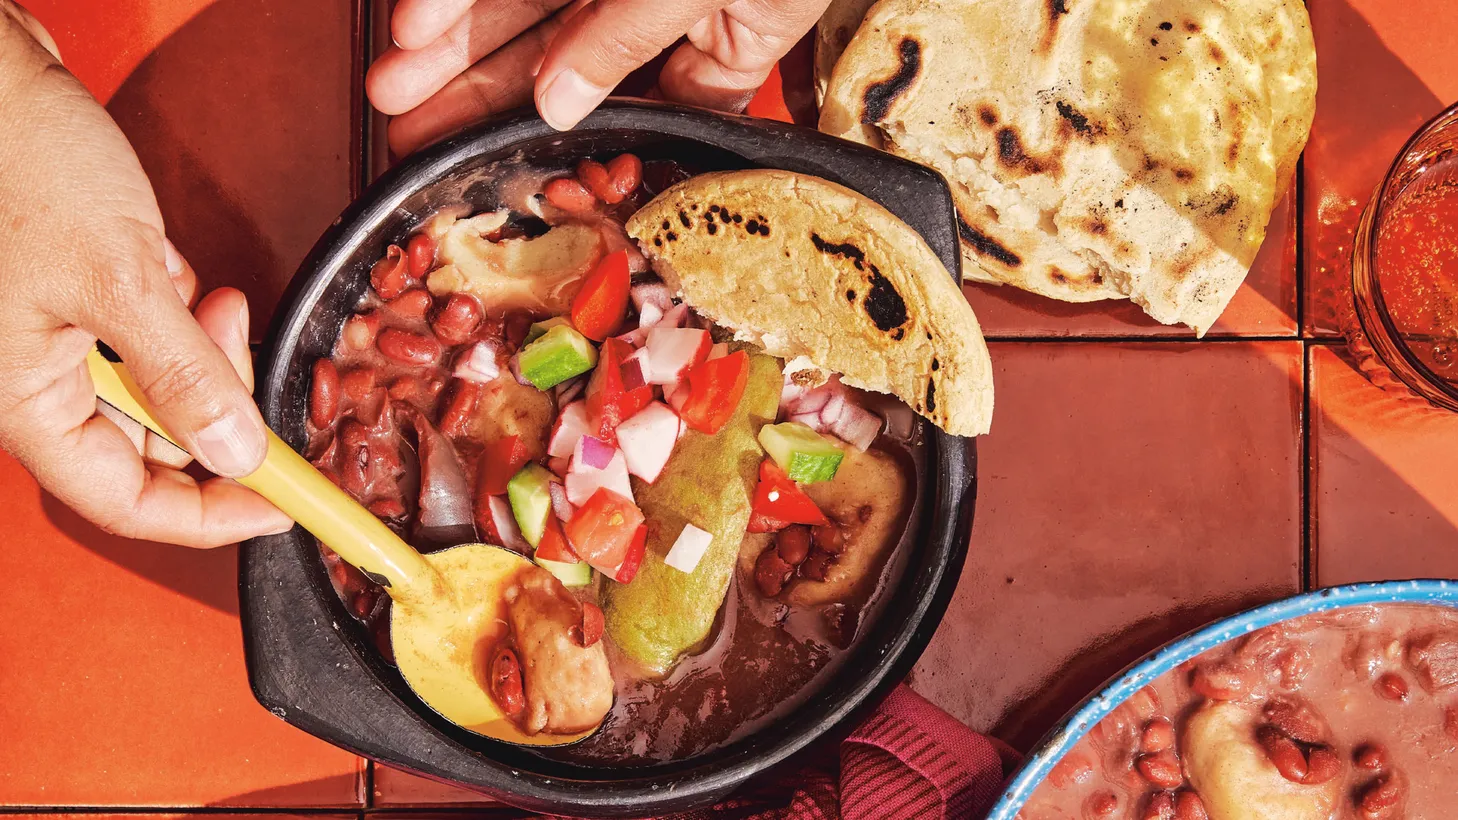 Frijoles are one of the staples of Salvadoran cuisine.